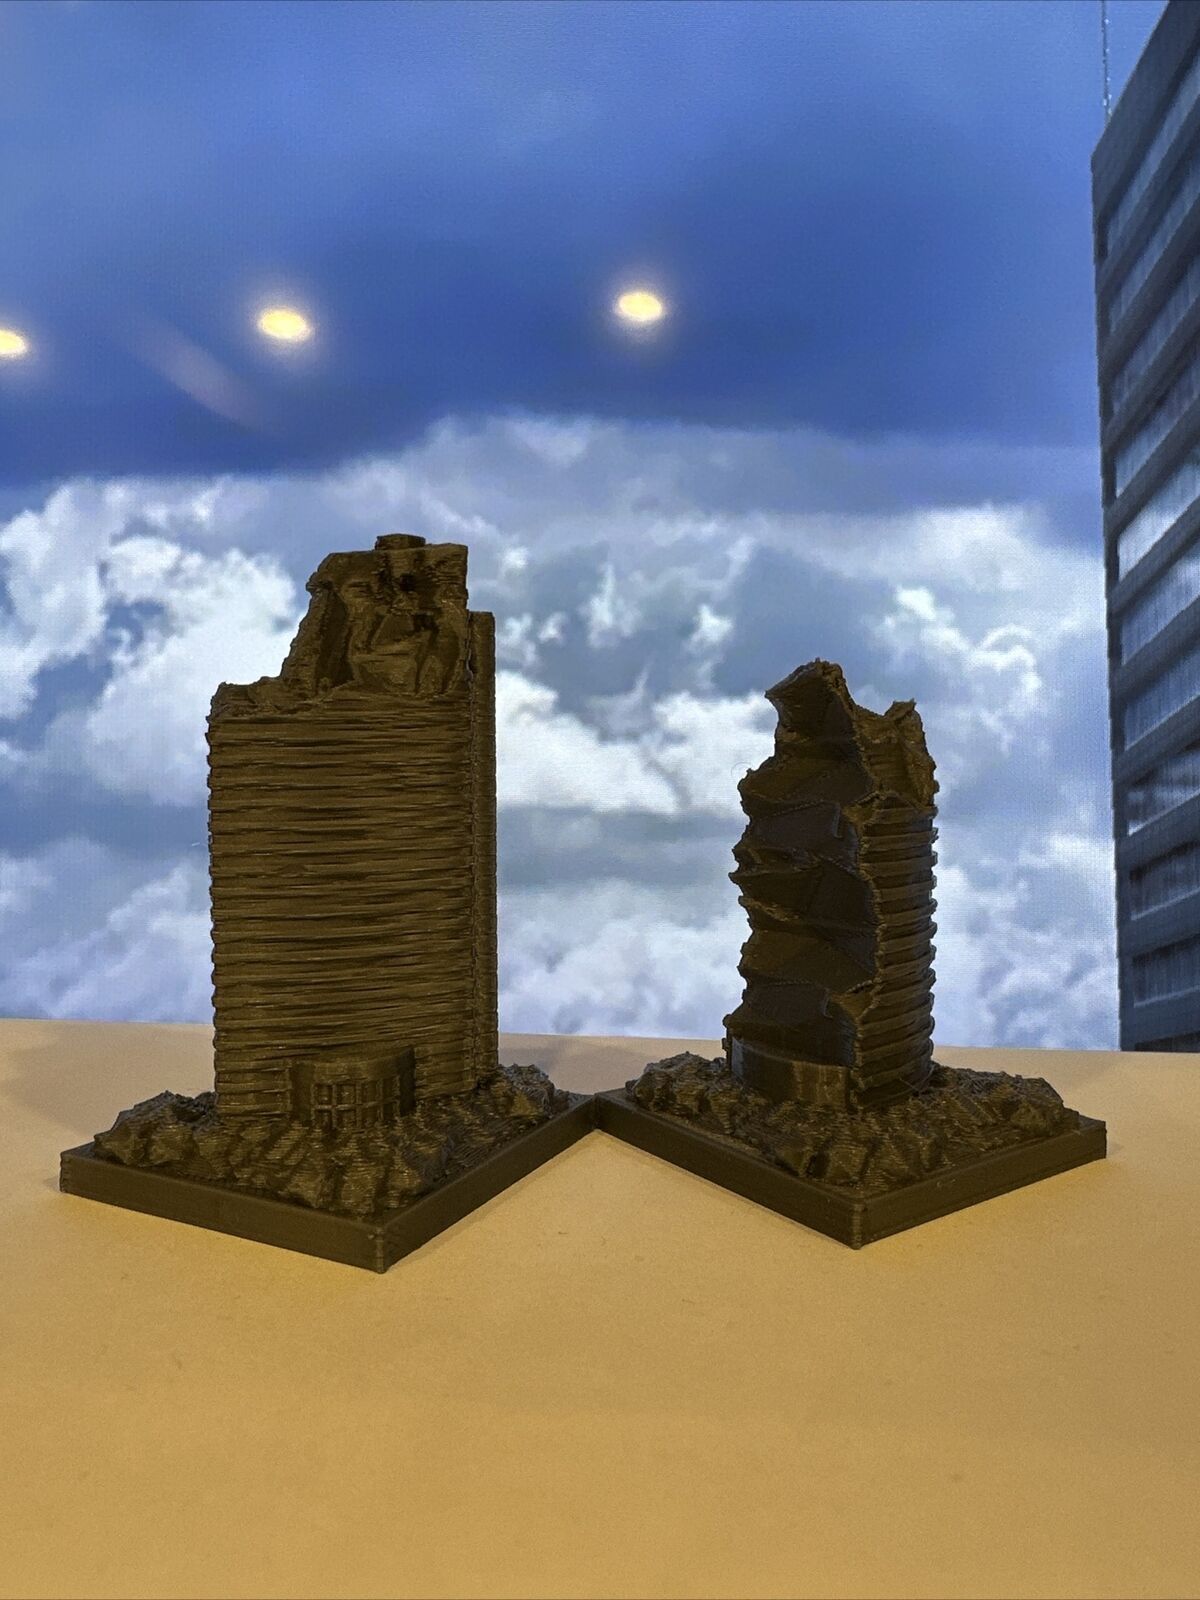 2 Buildings Scaled For Sh Monsterarts, Neca, And Hiya (6-8Inch Figure) Godzilla